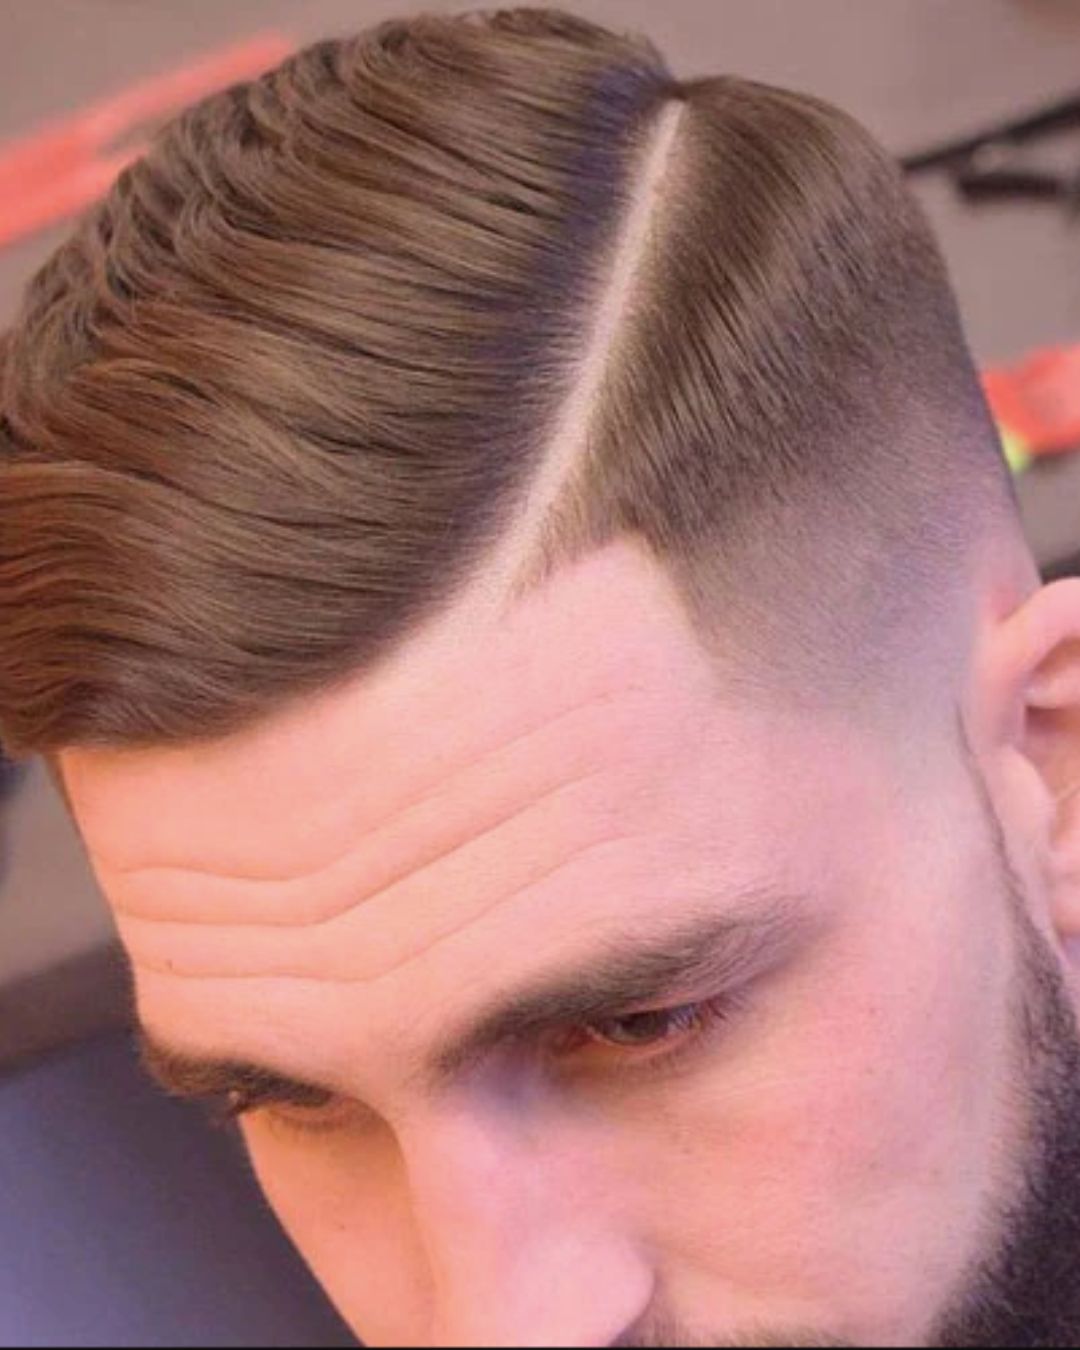 Side Part Fade